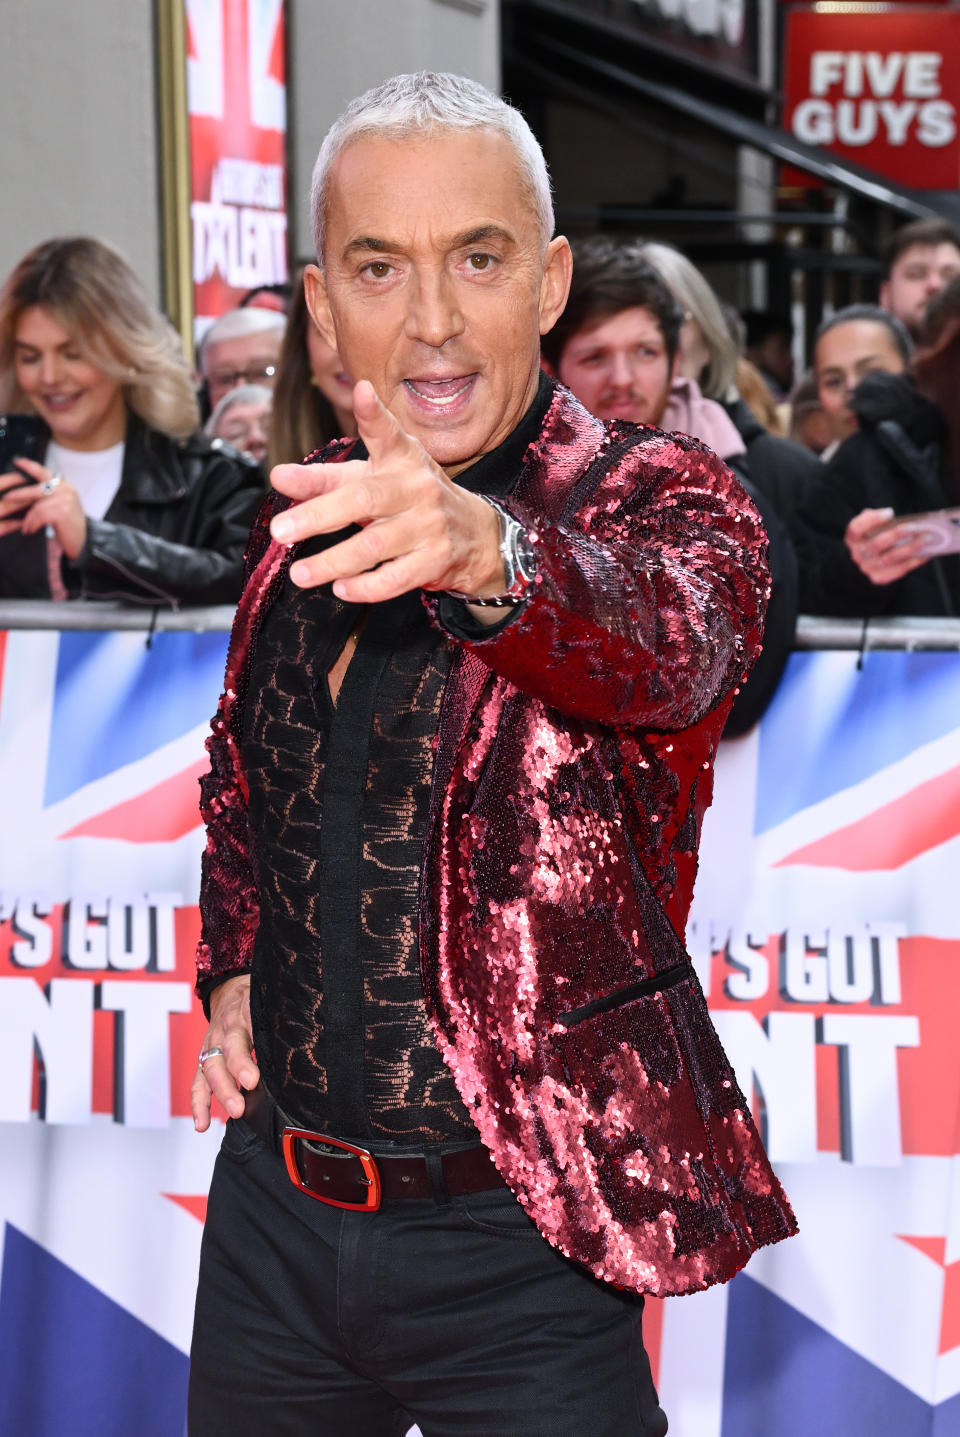 LONDON, ENGLAND - JANUARY 27: Bruno Tonioli attends the Britain's Got Talent 2023 Photocall at London Palladium on January 27, 2023 in London, England. (Photo by Karwai Tang/WireImage)